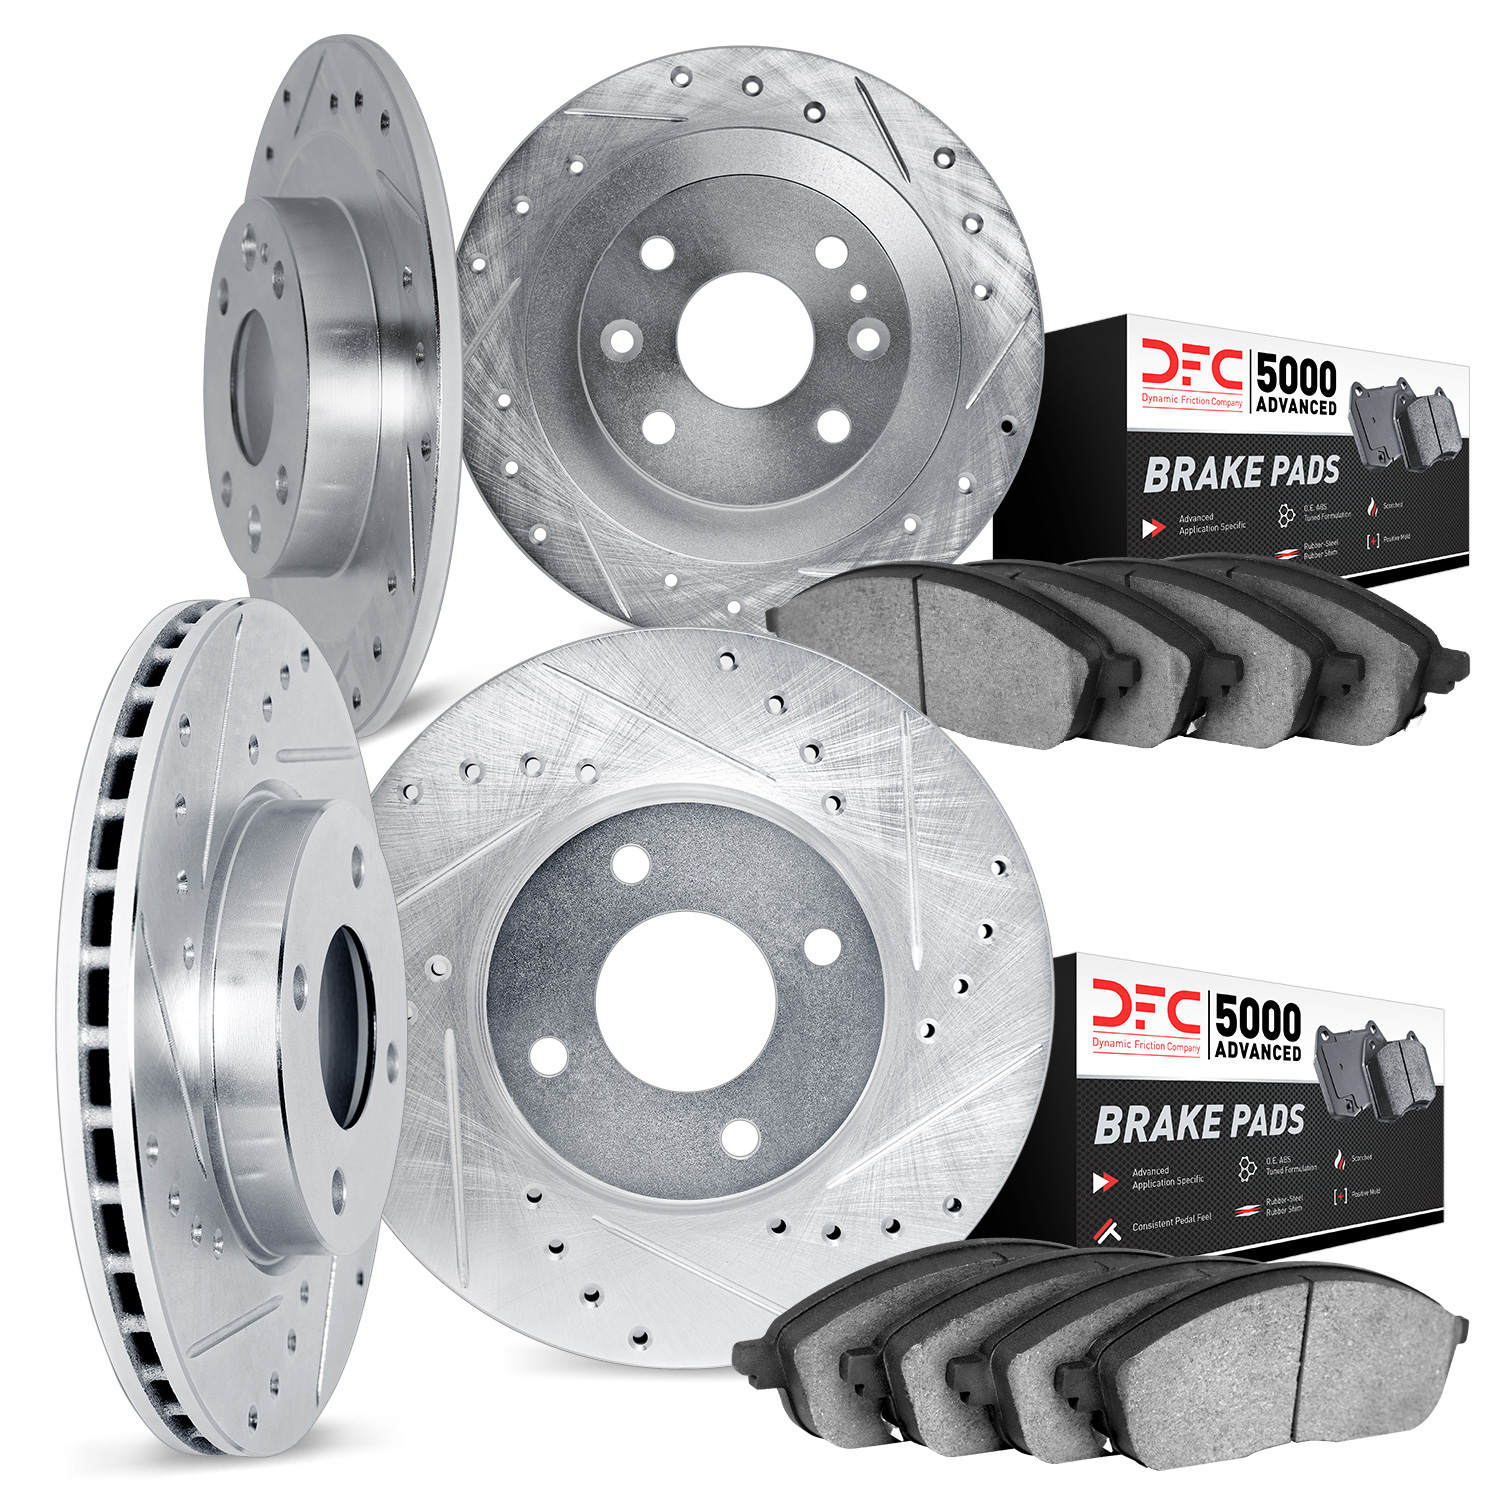 7504-07000 Drilled/Slotted Brake Rotors w/5000 Advanced Brake Pads Kit [Silver], 2012-2019 Mopar, Position: Front and Rear